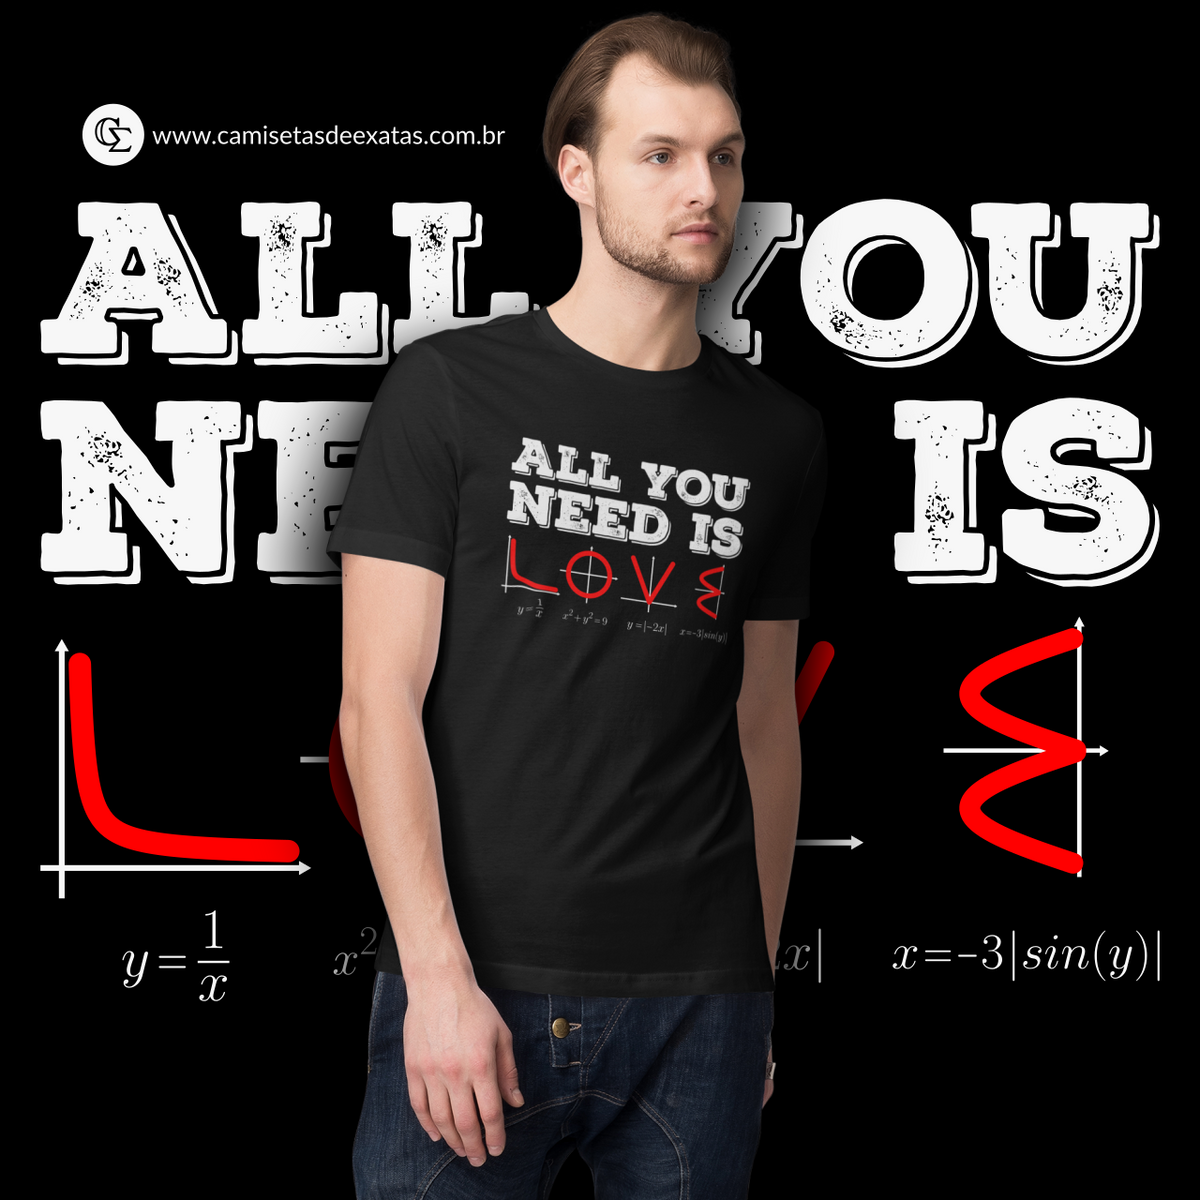 Nome do produto: ALL YOU NEED IS LOVE [3] [UNISSEX]